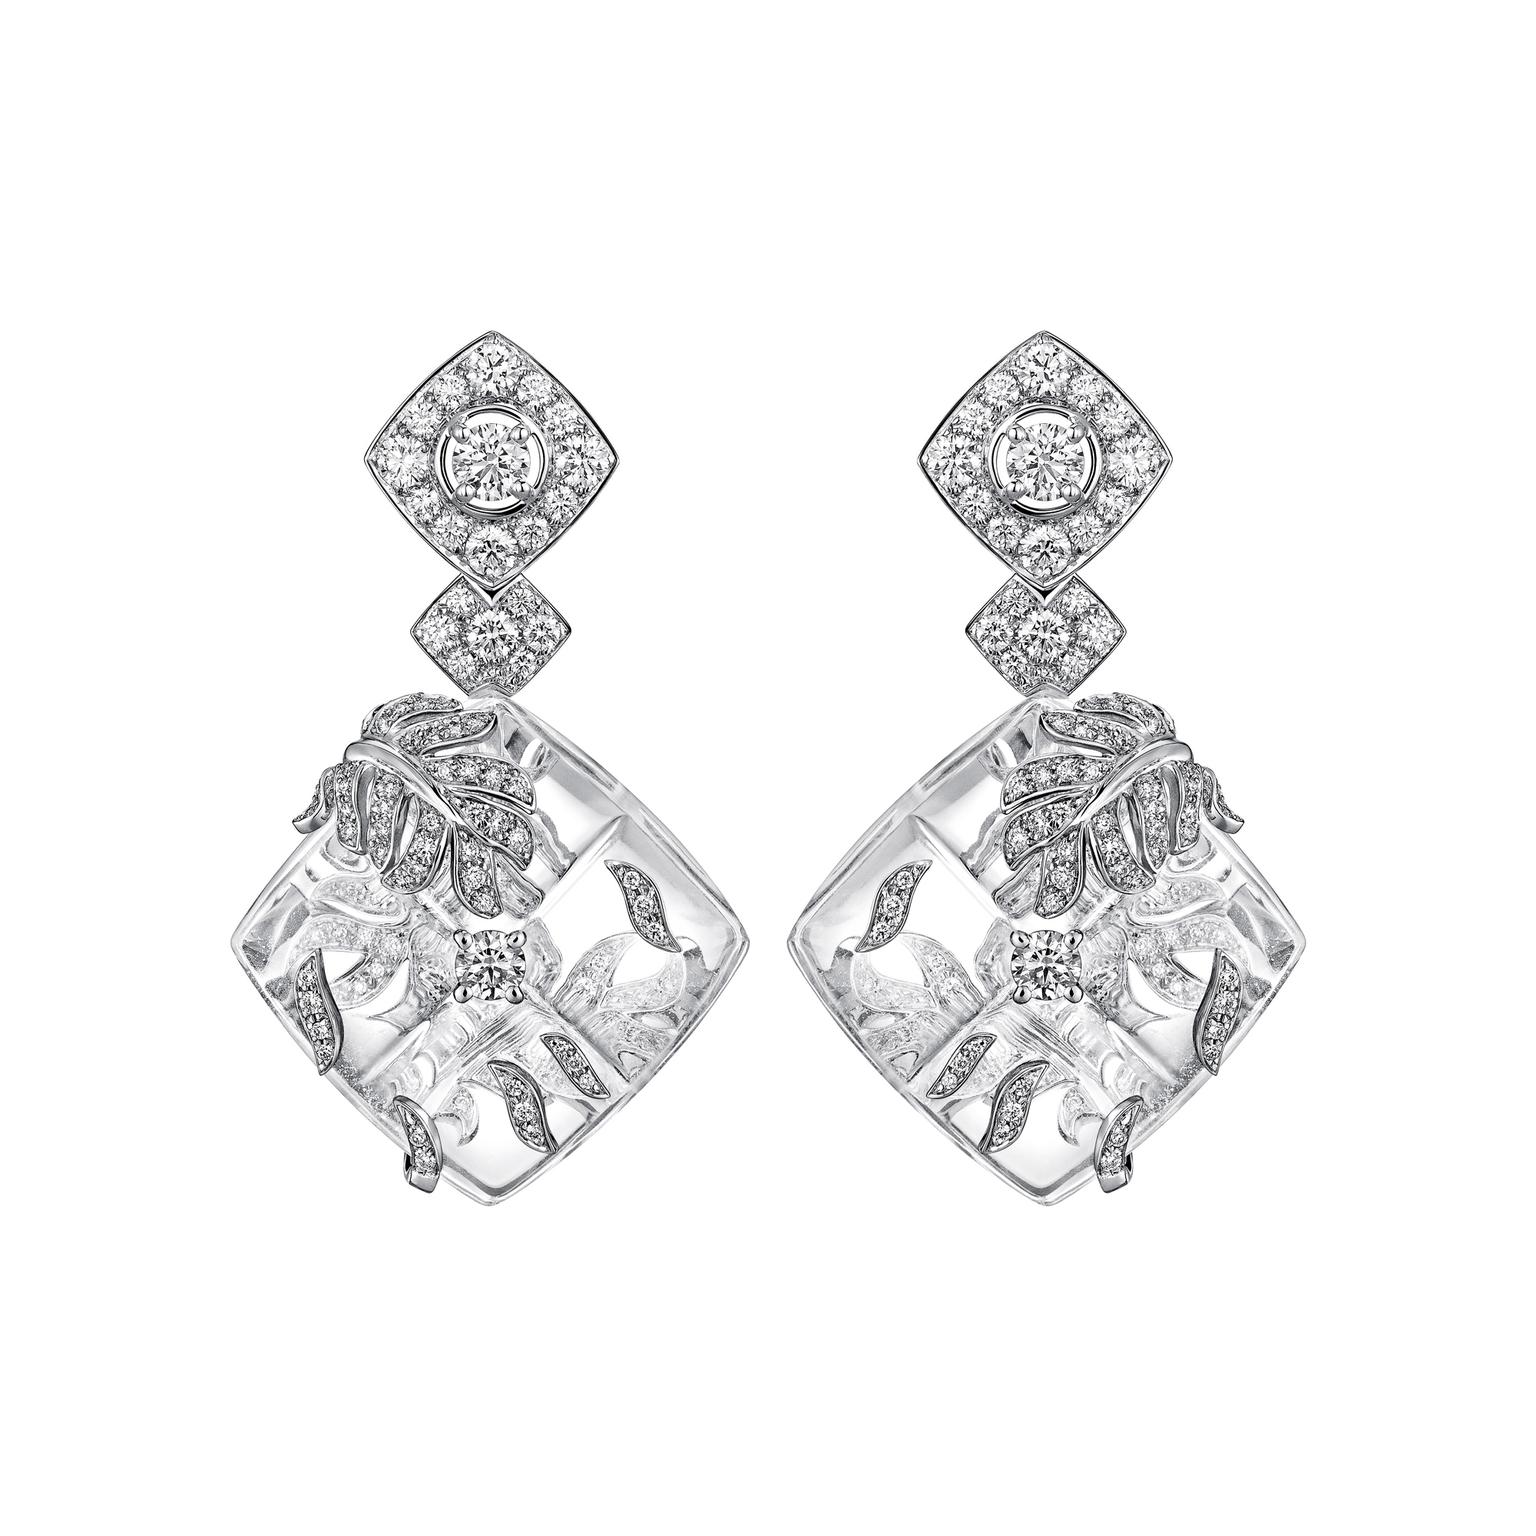 Chanel Signature Cocoon earrings